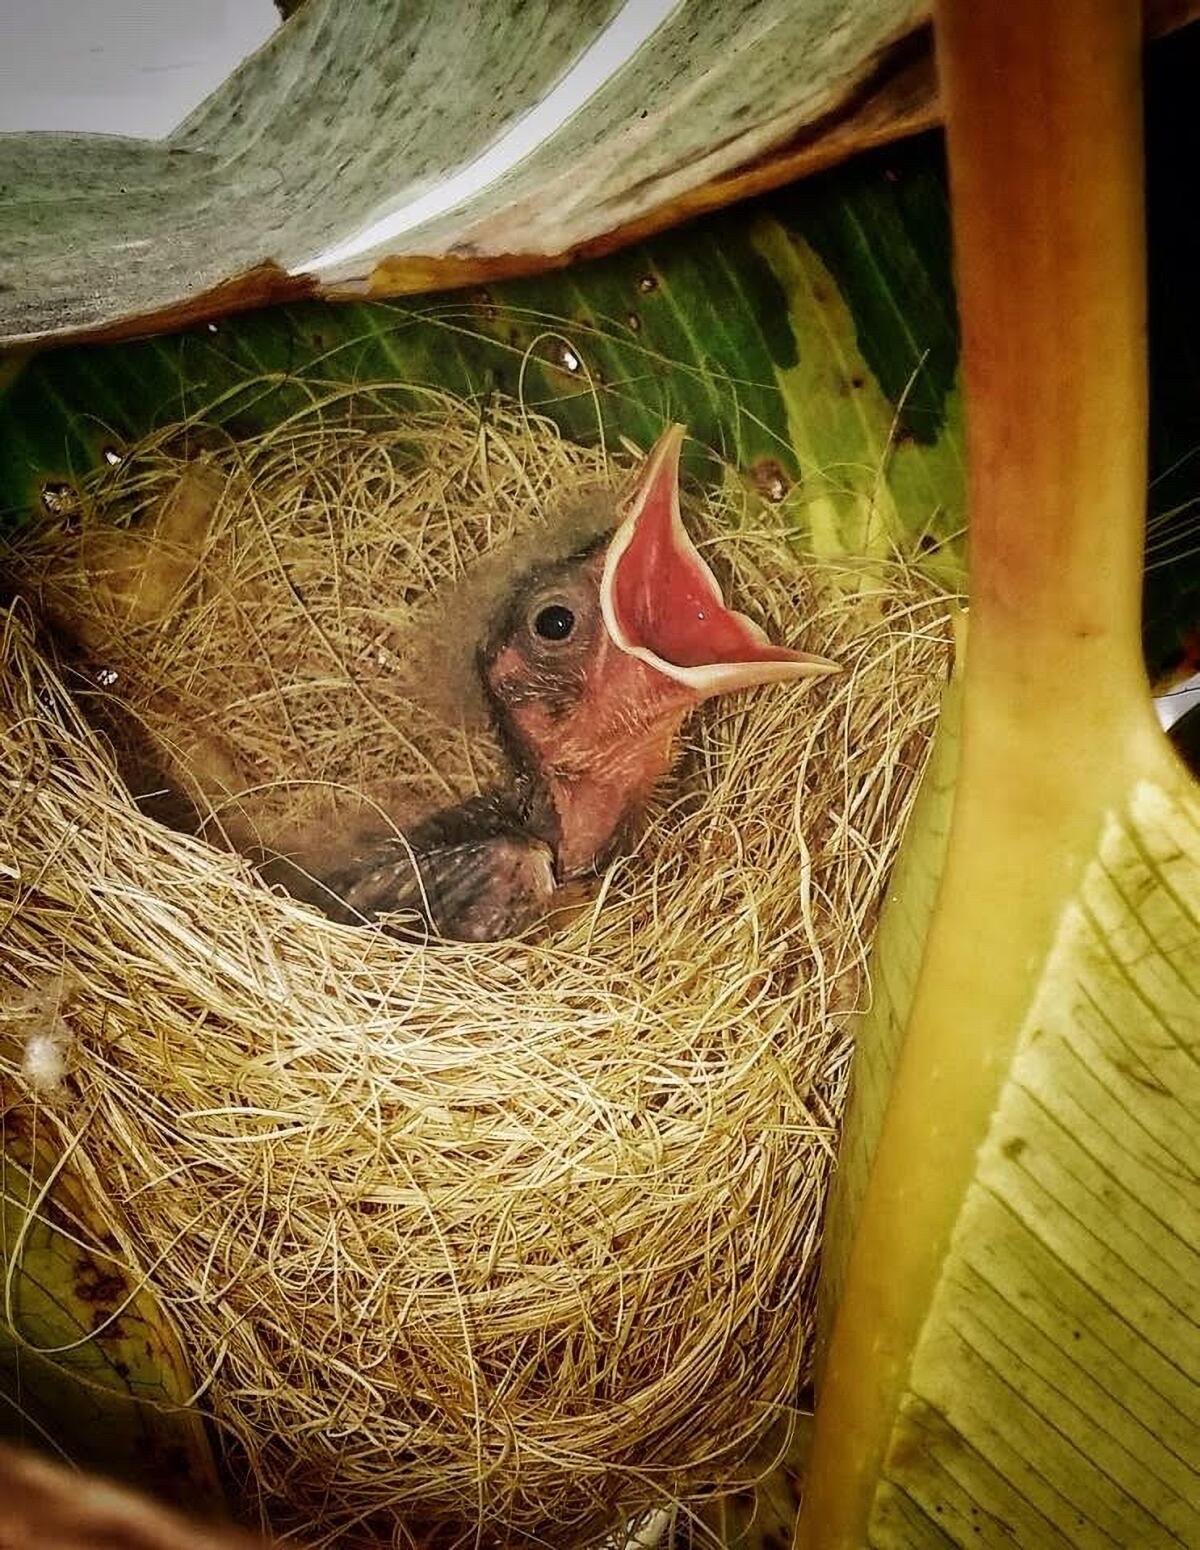 A hooded oriole chick in a nest.